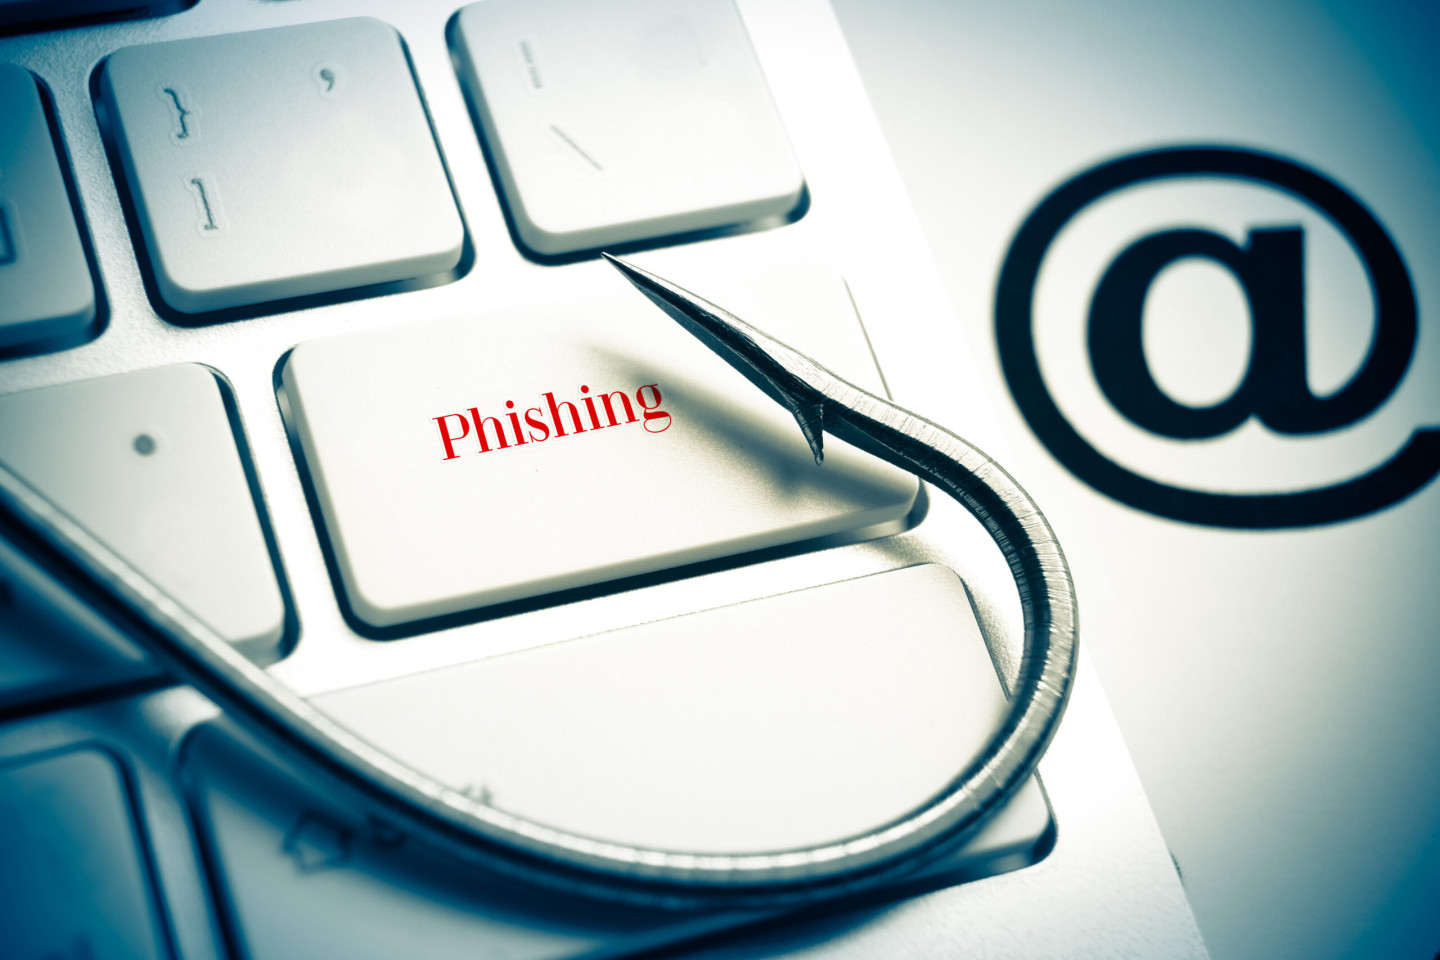 90% of Cyber-Attacks Begin with a Phishing Email